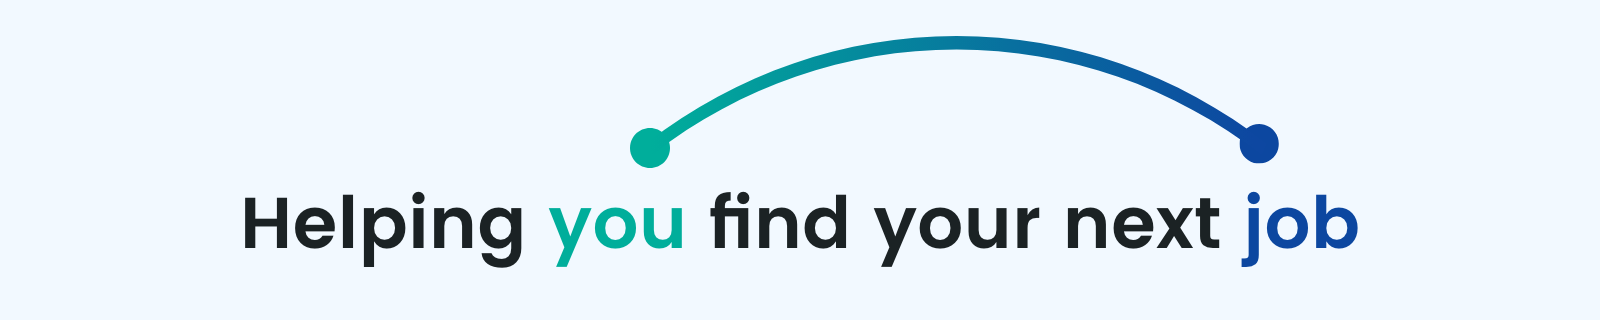 Helping you find your next job